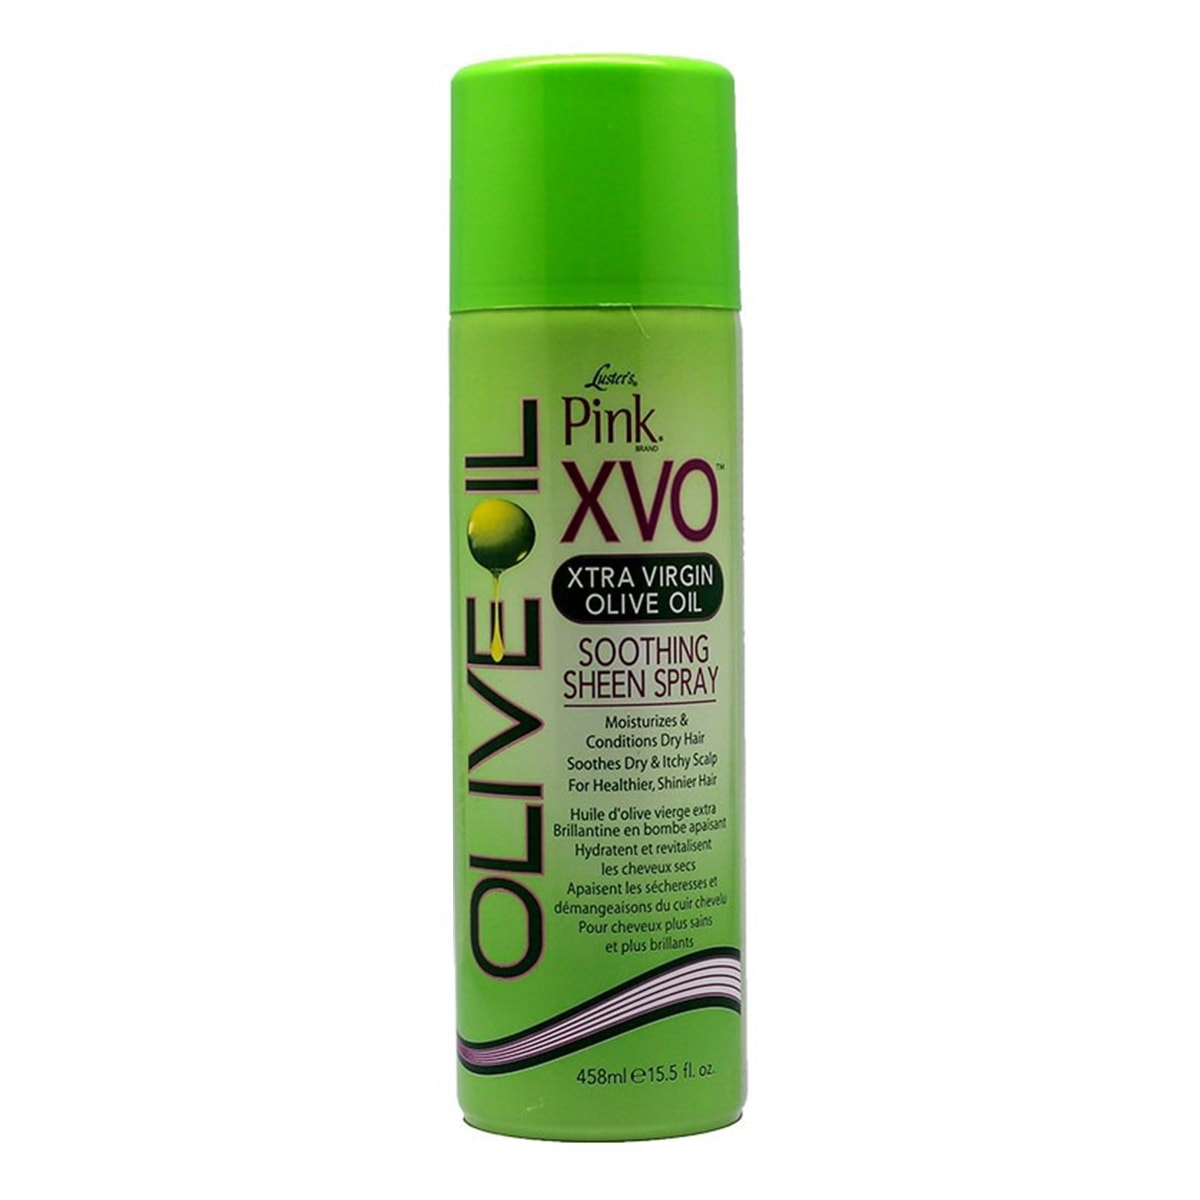 Buy Luster Pink XVO Xtra Virgin Olive Oil Soothing Sheen Spray - 458 ml